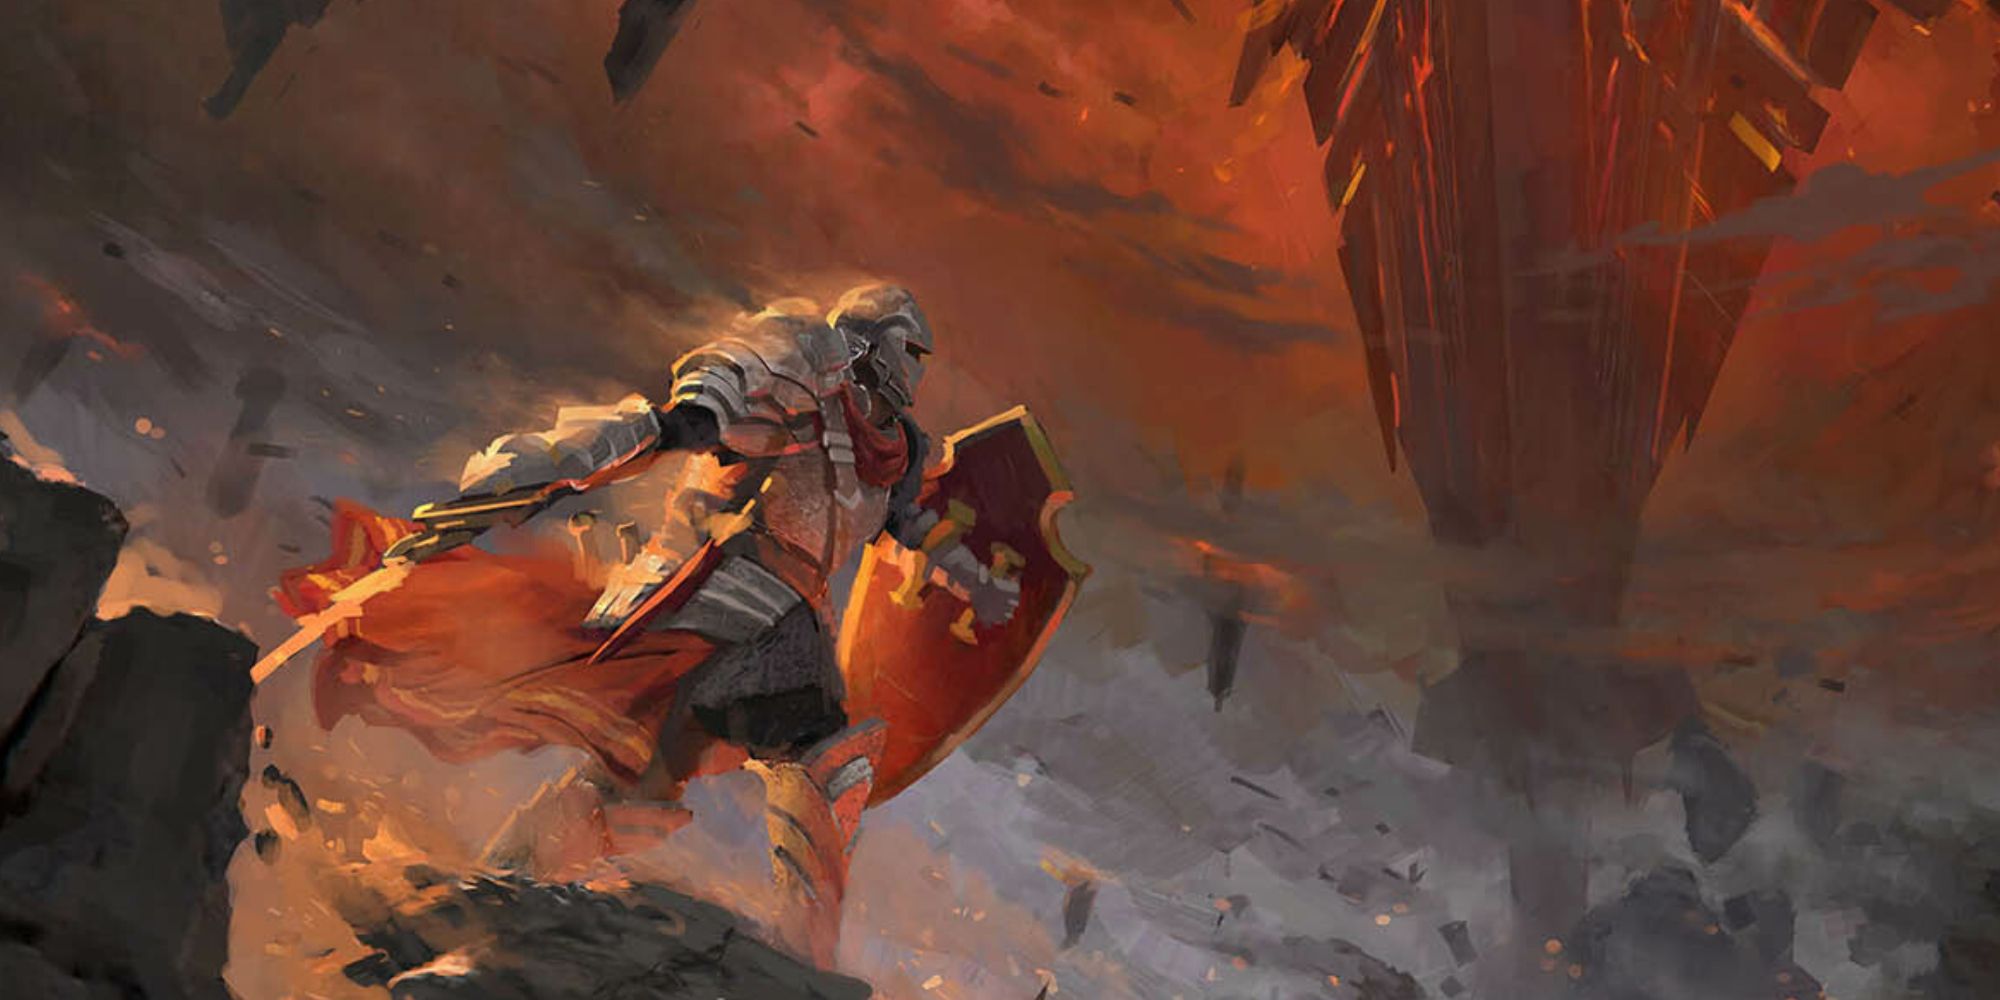 Descent into Avernus by Clint Cearley paladin standing on a ledge while wielding a sword and shield